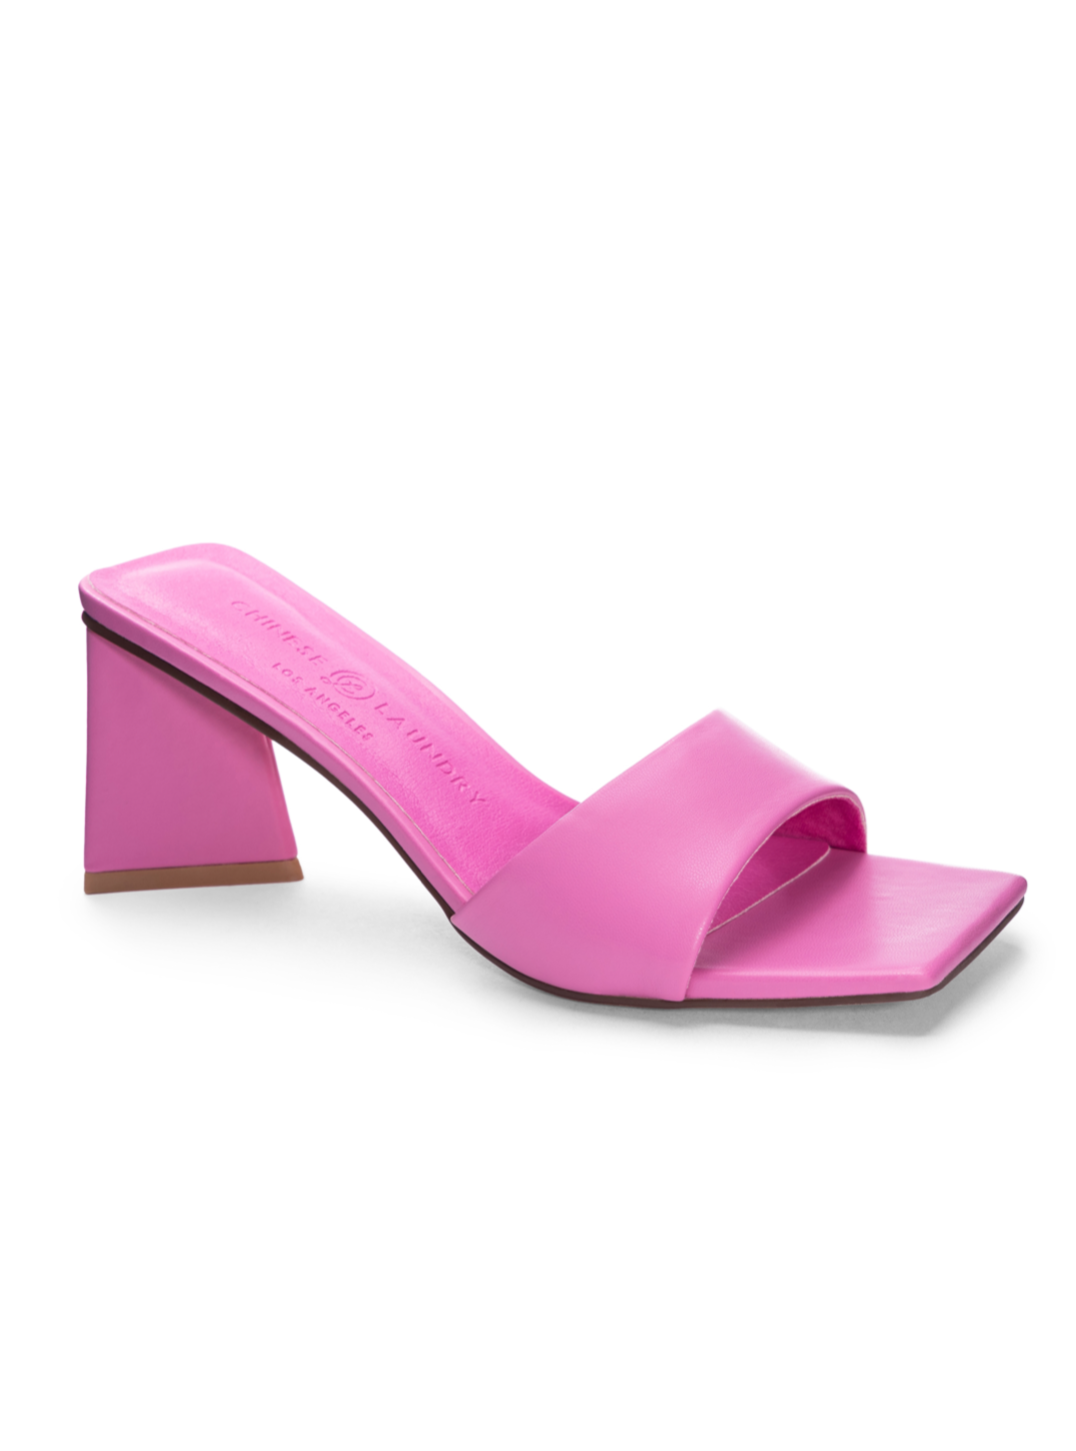 Chinese Laundry Yanda Slide Sandal in Pink - Size 10 Available